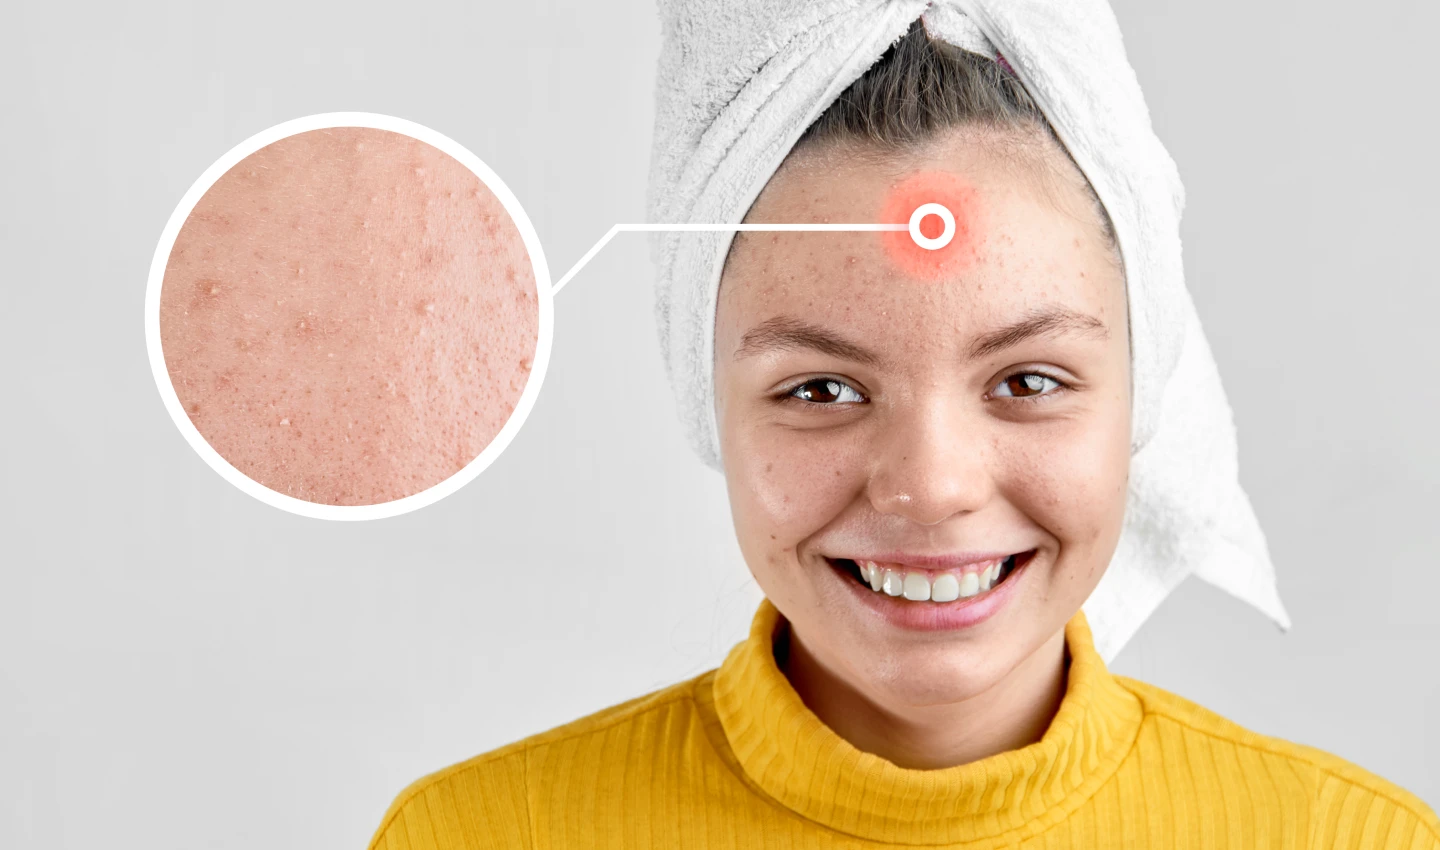 A girl with acne-prone skin pointing to a spot on her face, representing the different types of acne and their causes.